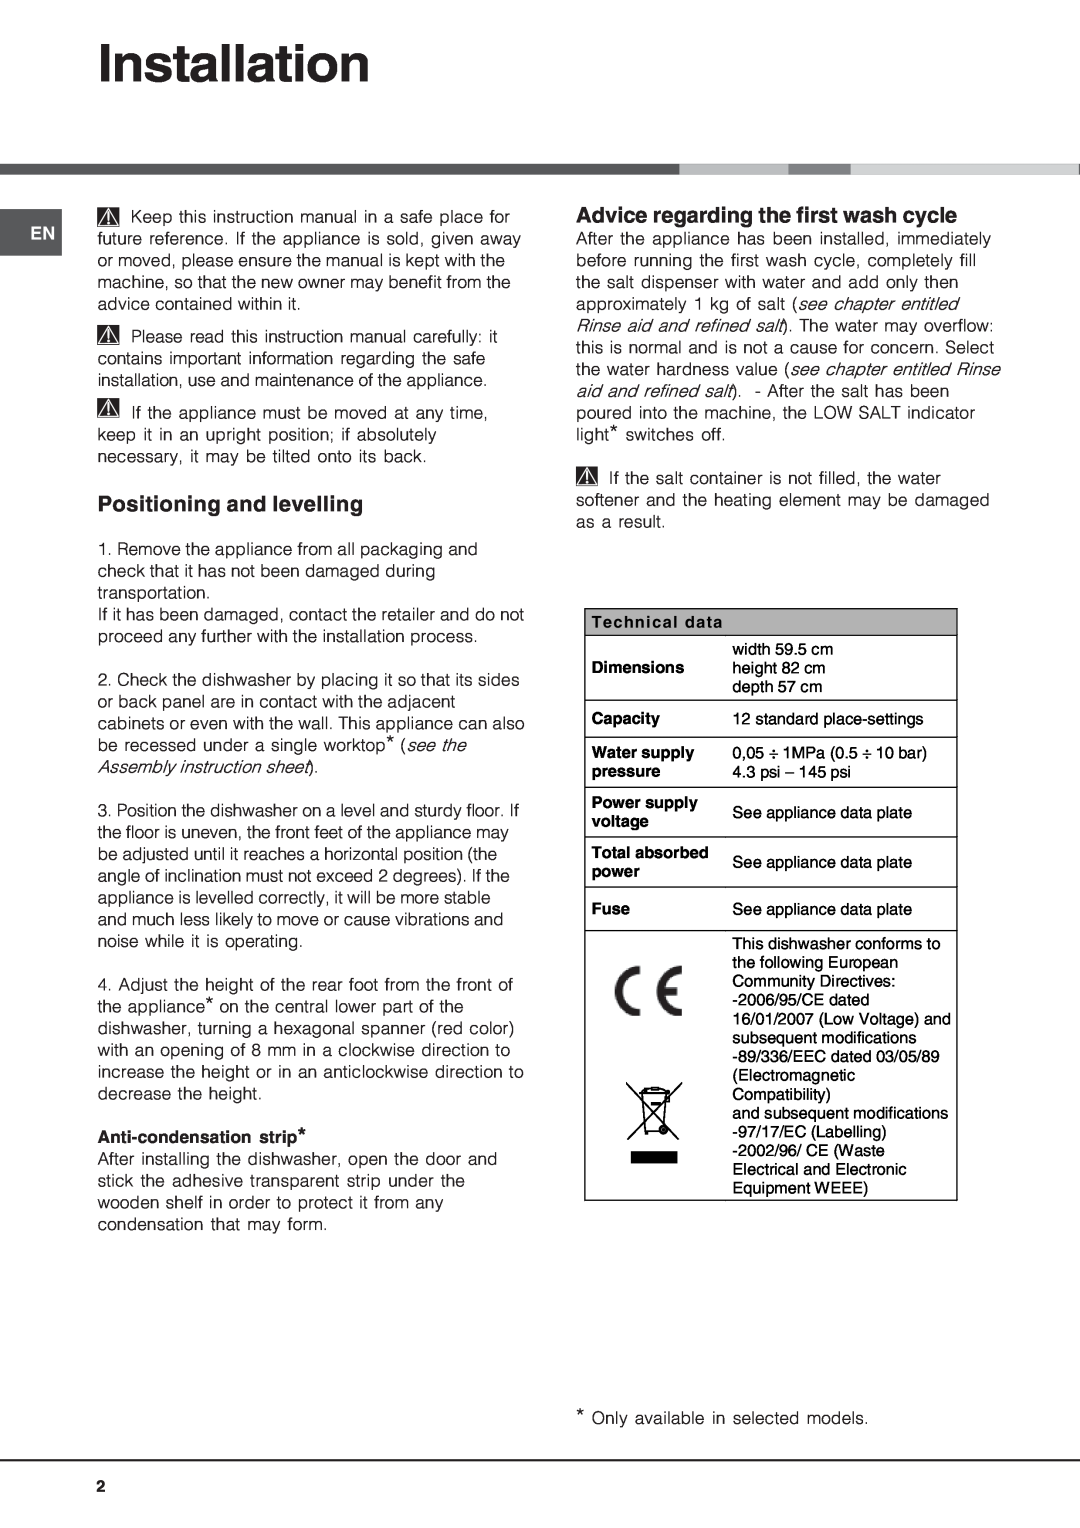 Hotpoint LFT04 manual Installation, Positioning and levelling, Advice regarding the first wash cycle 